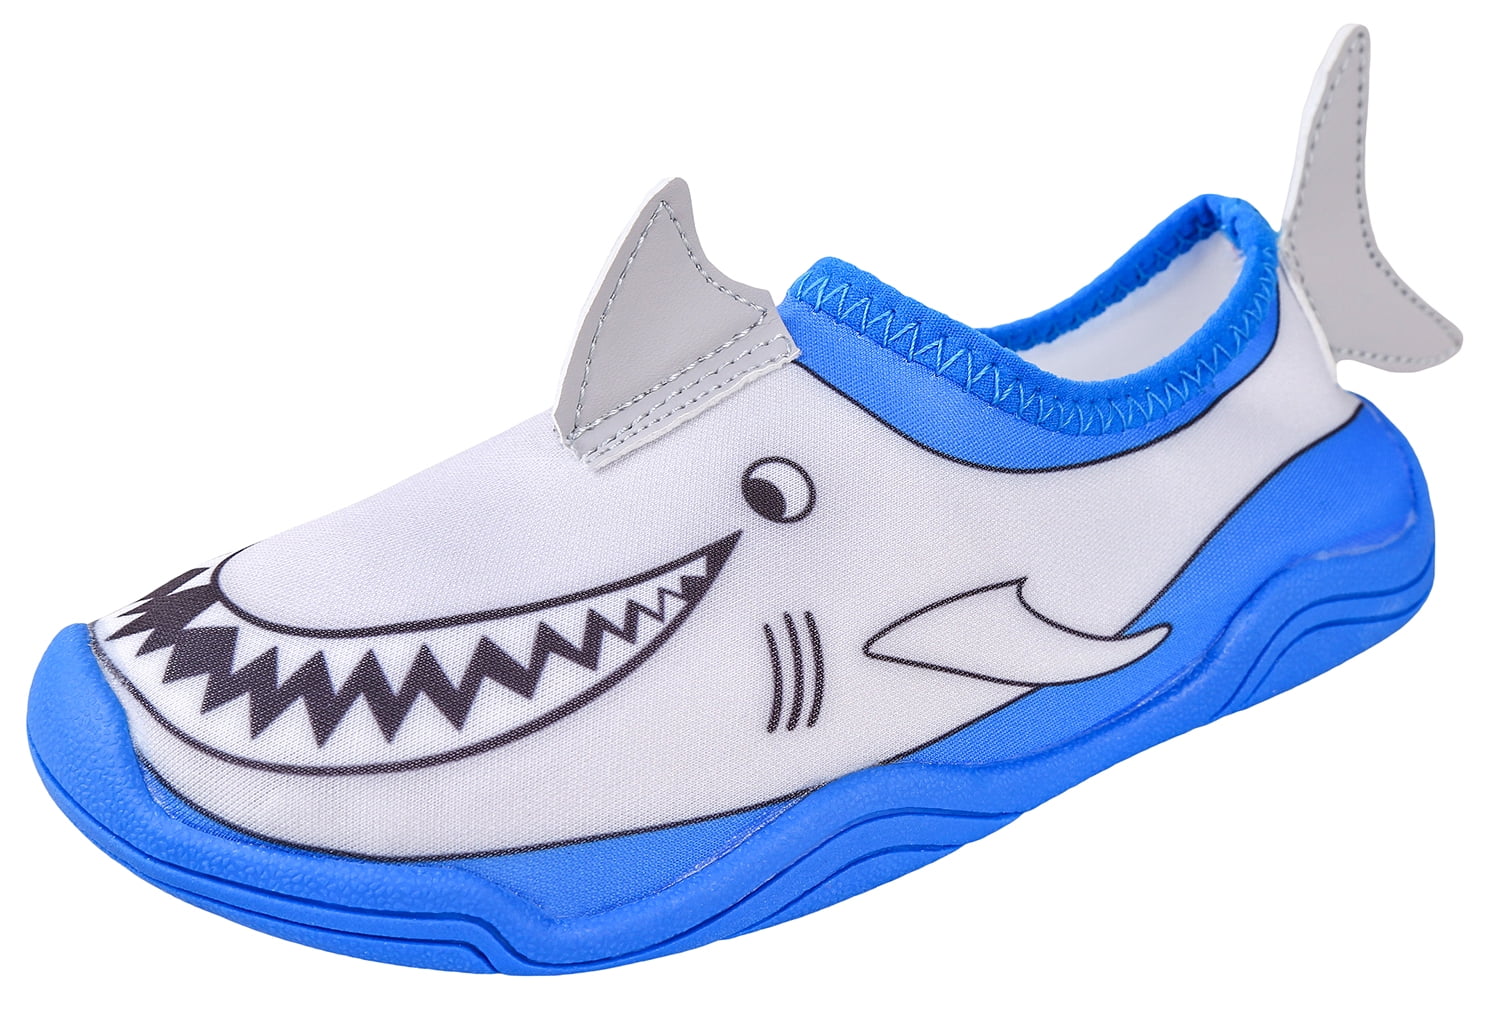 Sea Cute Octopus and Whale Shark Womens Low Cut Non-Slip wear-Resistant Rubber Sole Tennis Shoes